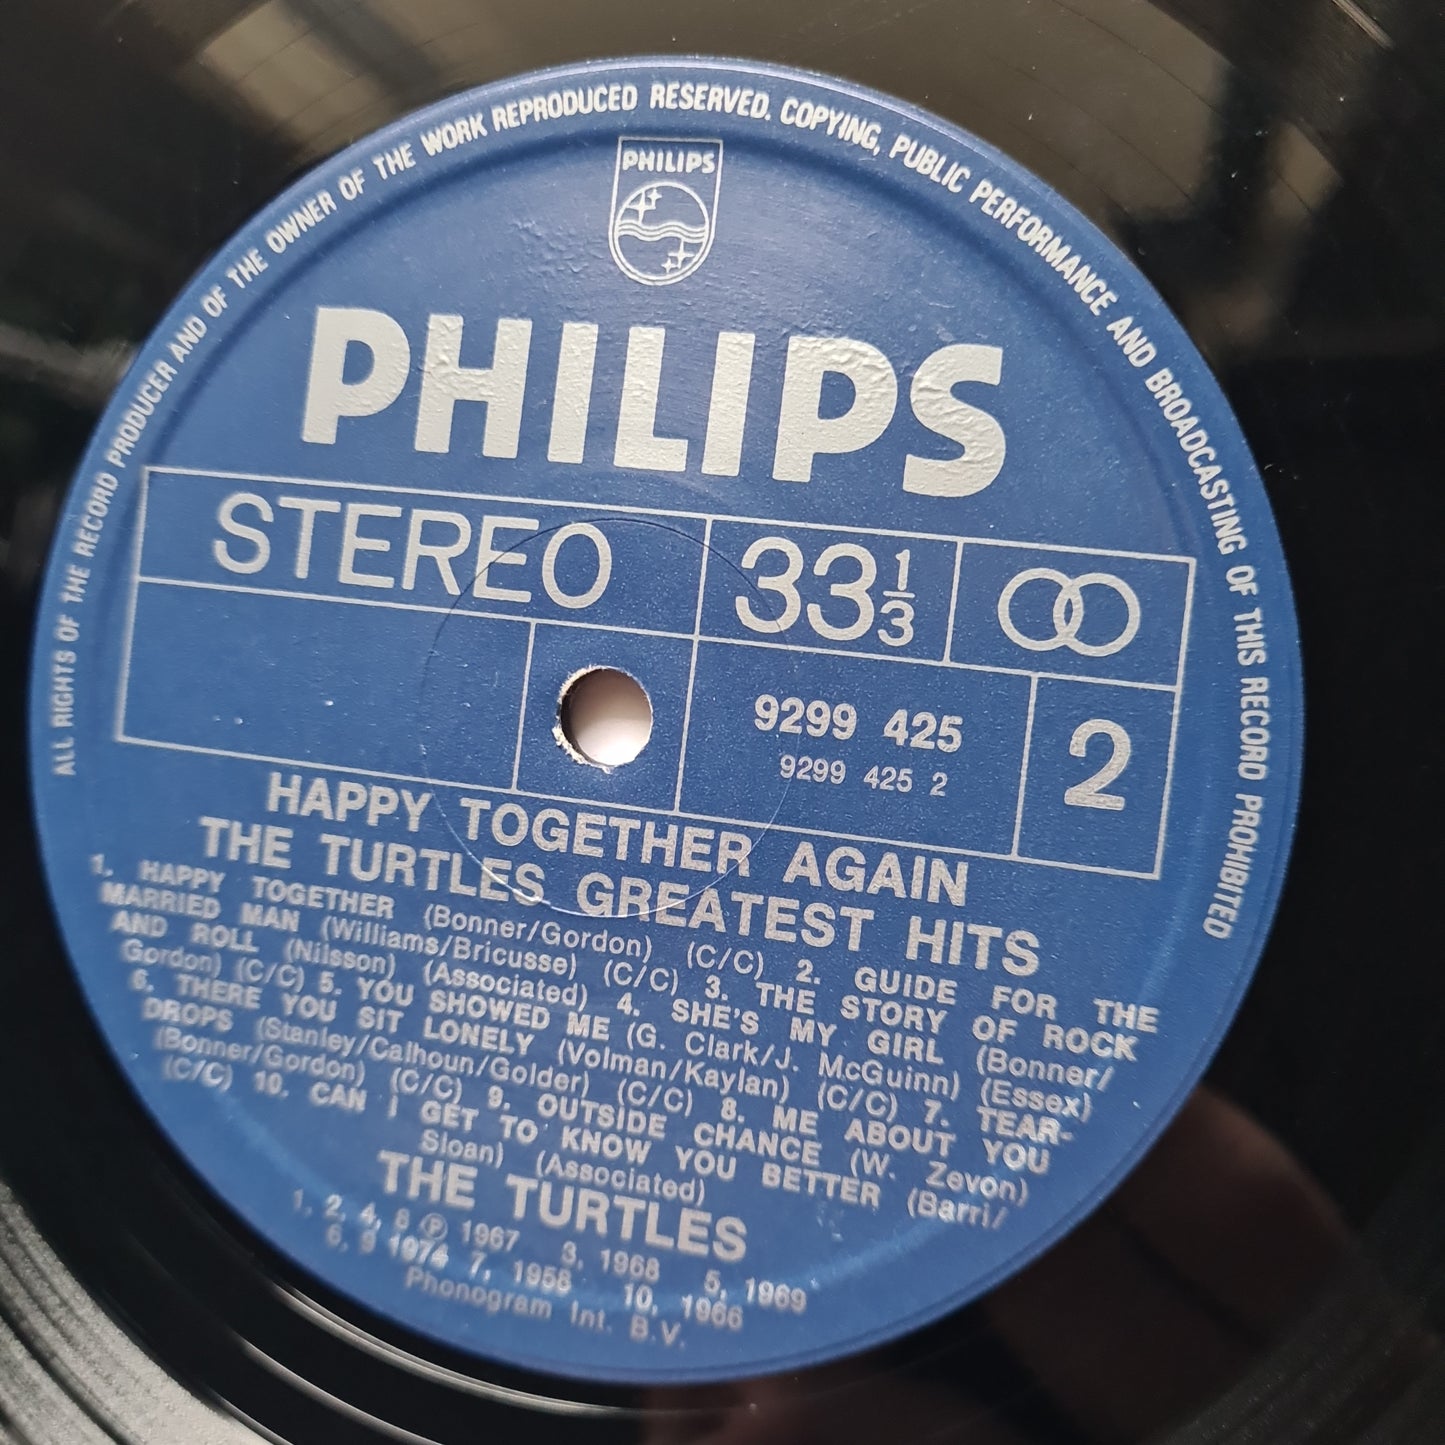 The Turtles – "Happy Together Again!" The Turtles Greatest Hits - 1974 - Vinyl Record